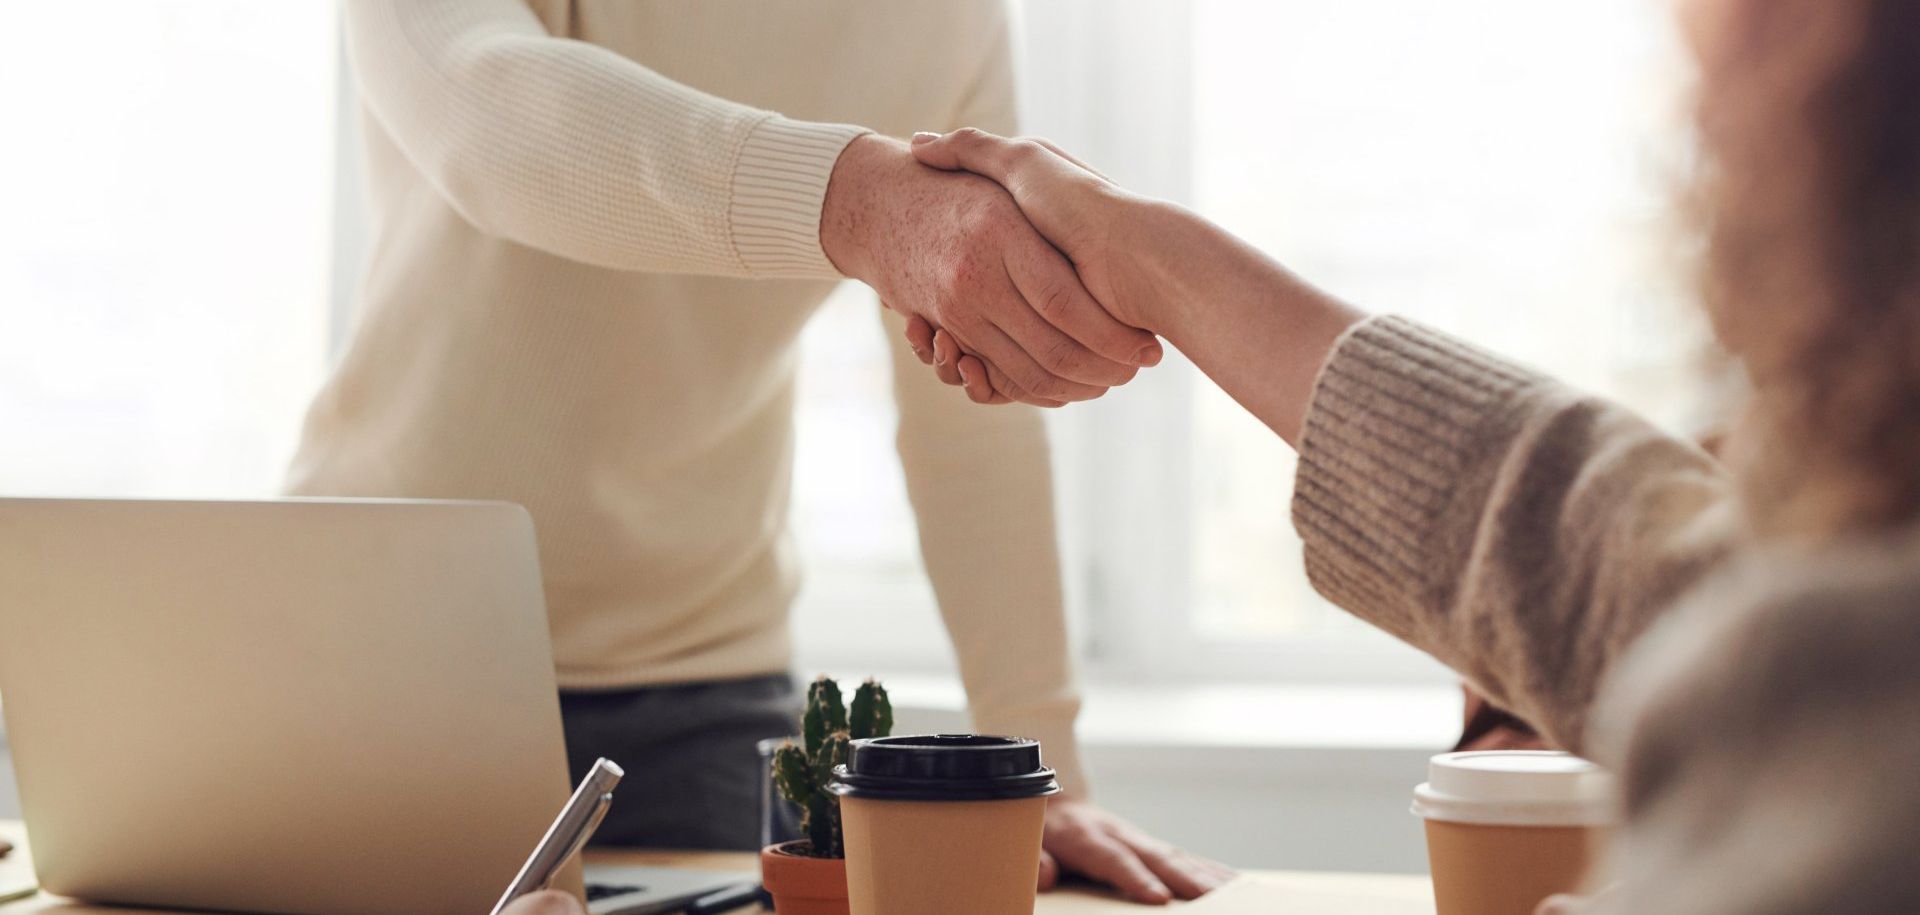 This is an image illustrating the concept of NetSuite implementation partners. It features two people shaking hands in an office.